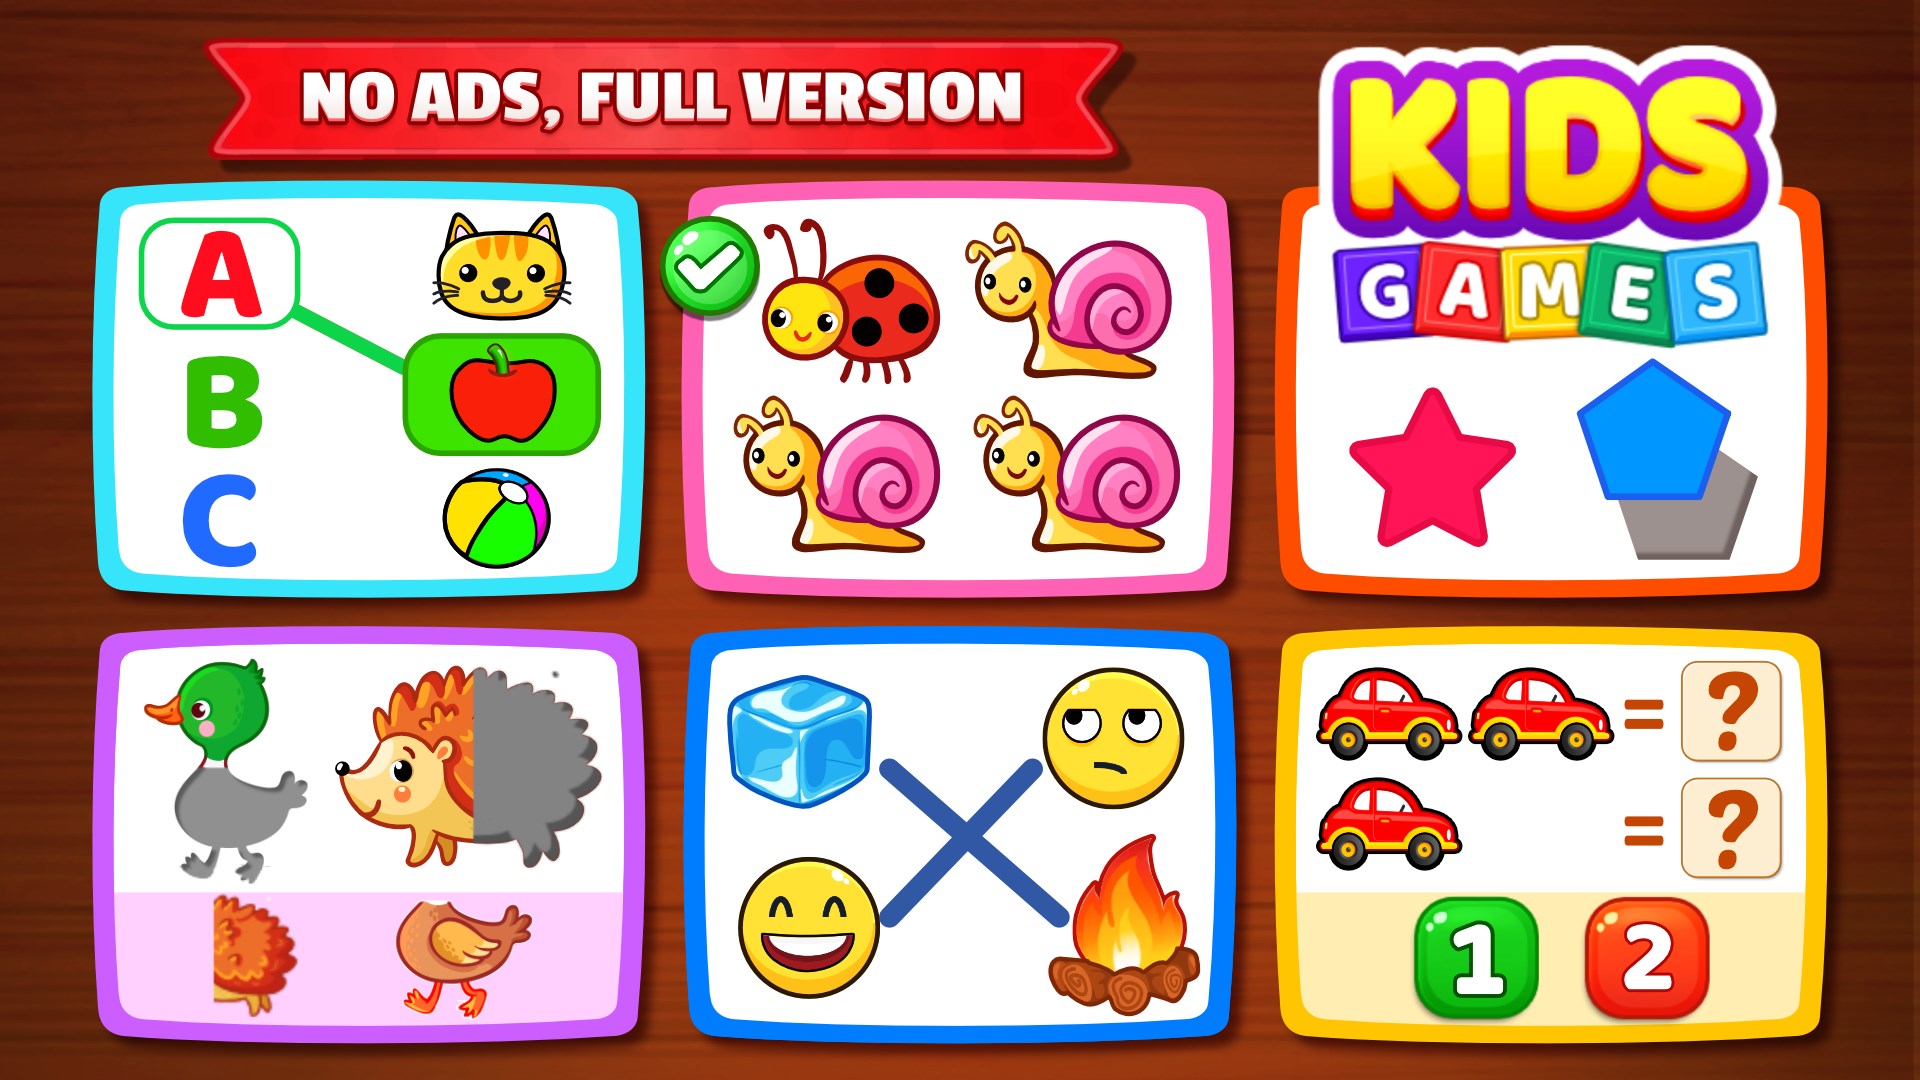 Kids Games - Play for Free